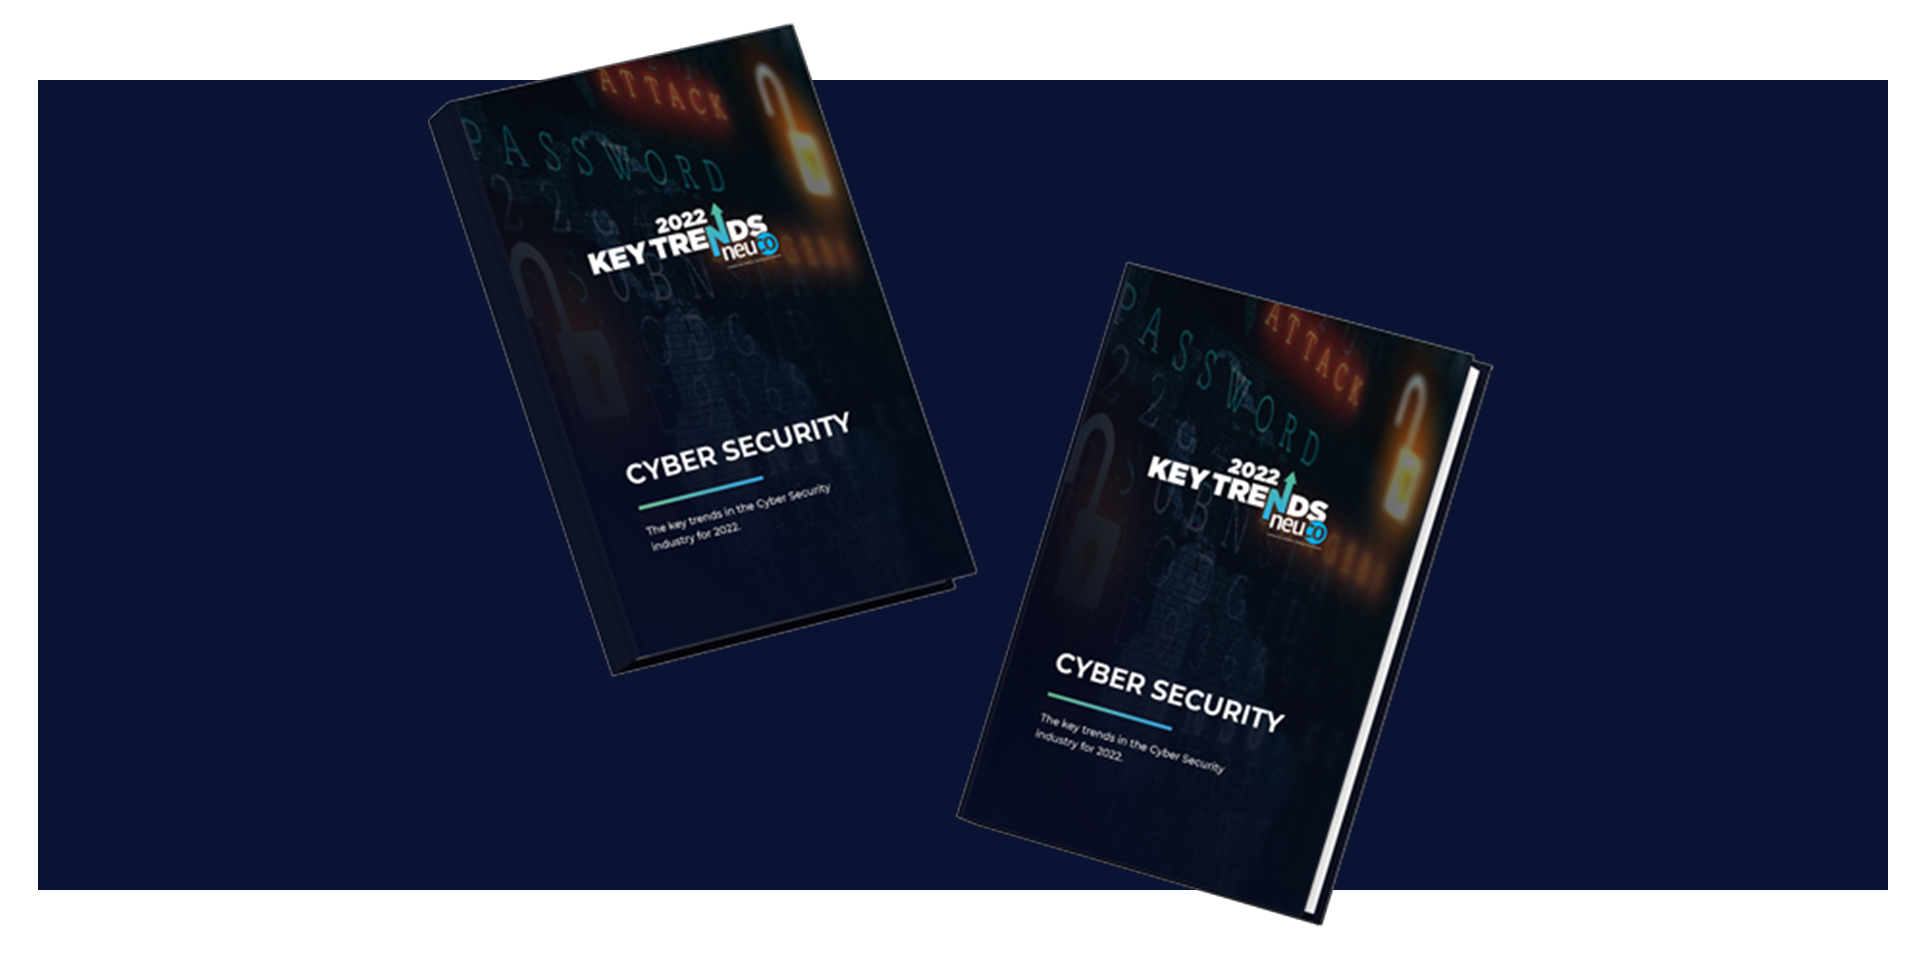 Cyber Security Key Trends. neuco’s annual 2022 key trends report.